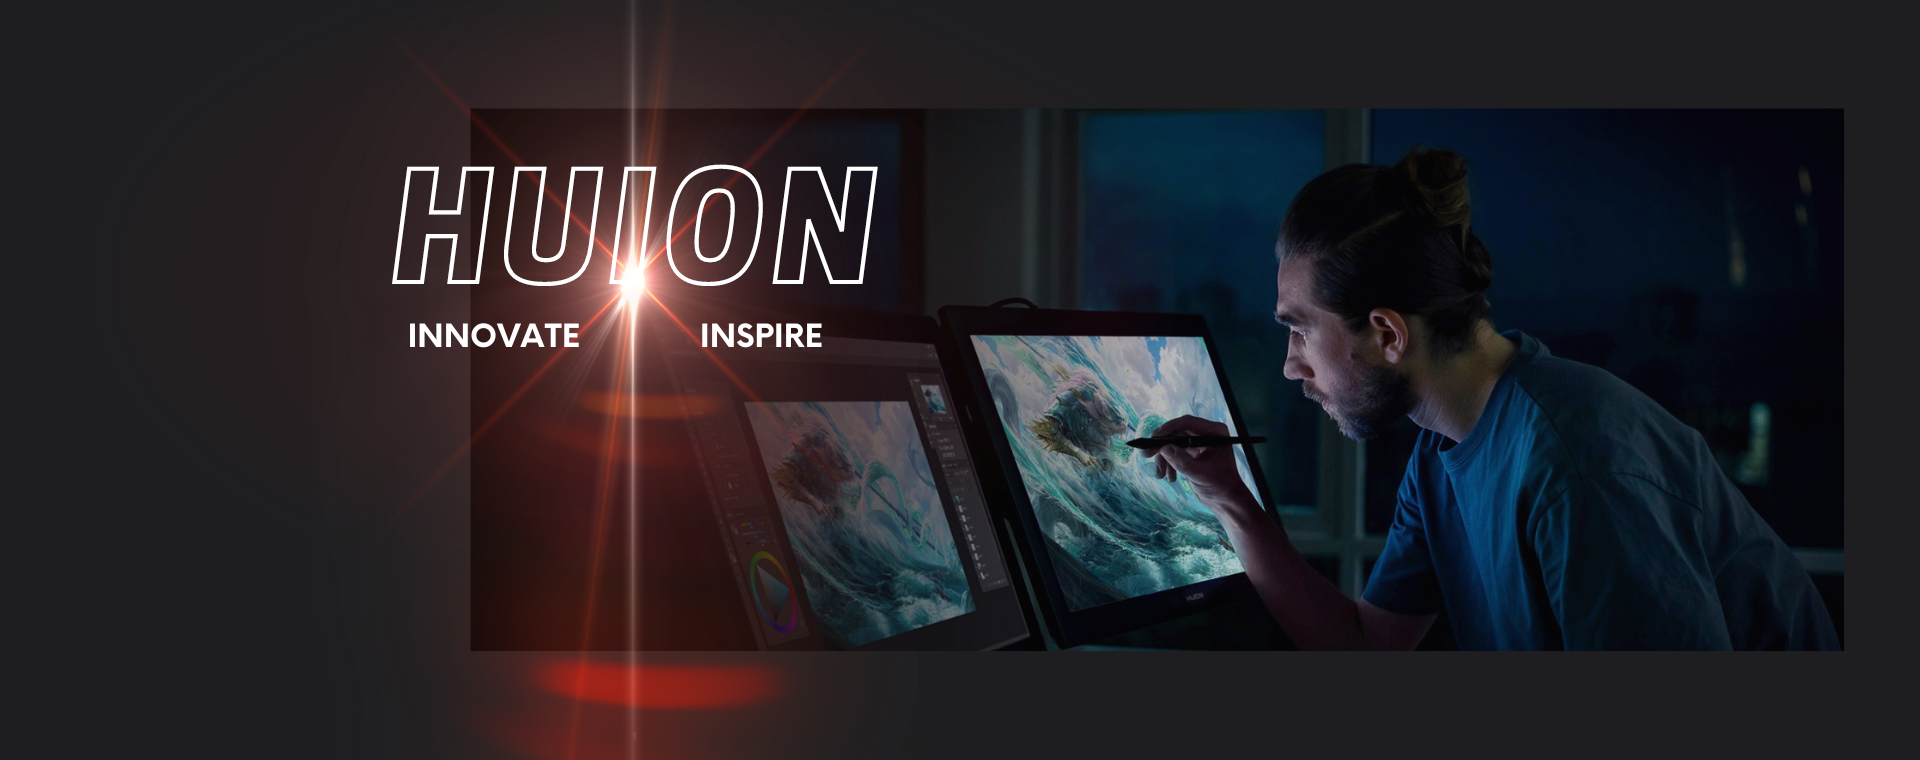 Huion Banner showcasing innovative digital drawing tablets and pen displays from Microworld Infosol